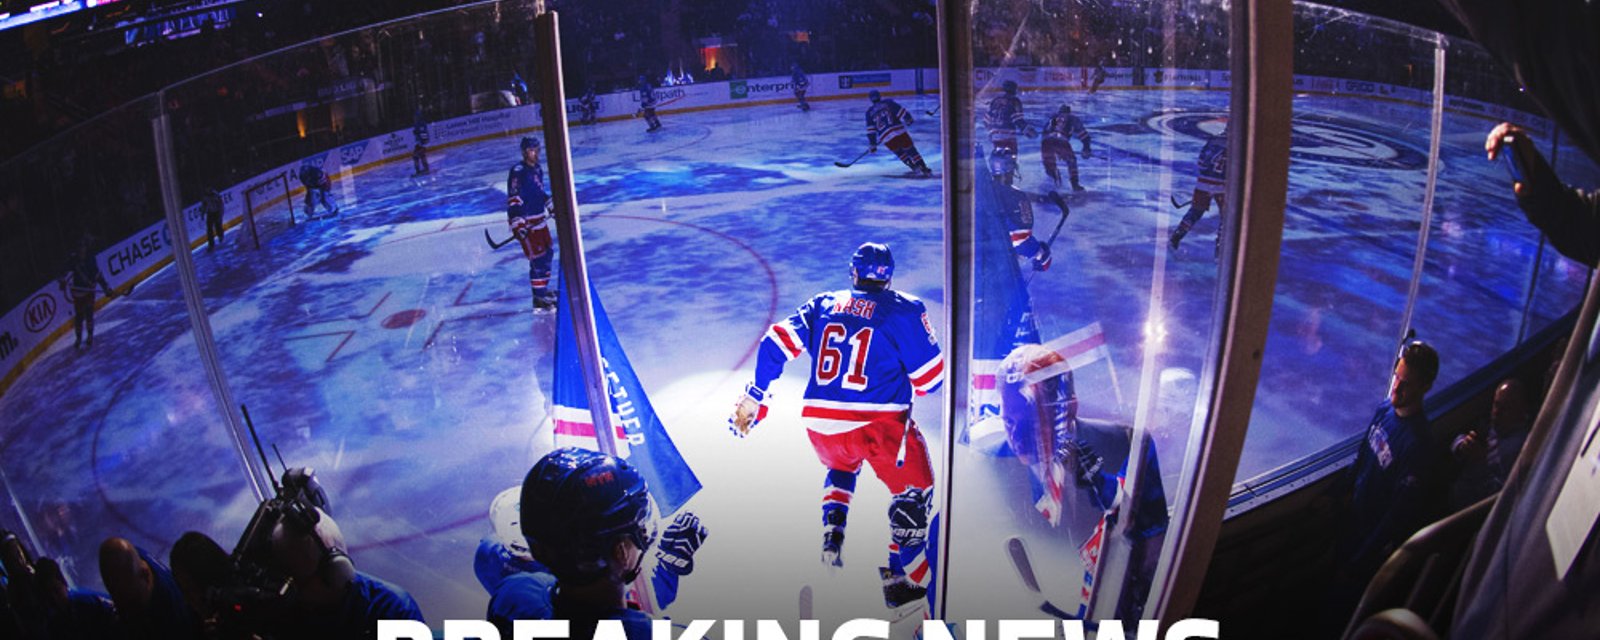 BREAKING: The New York Rangers sent one player back to Hartford.